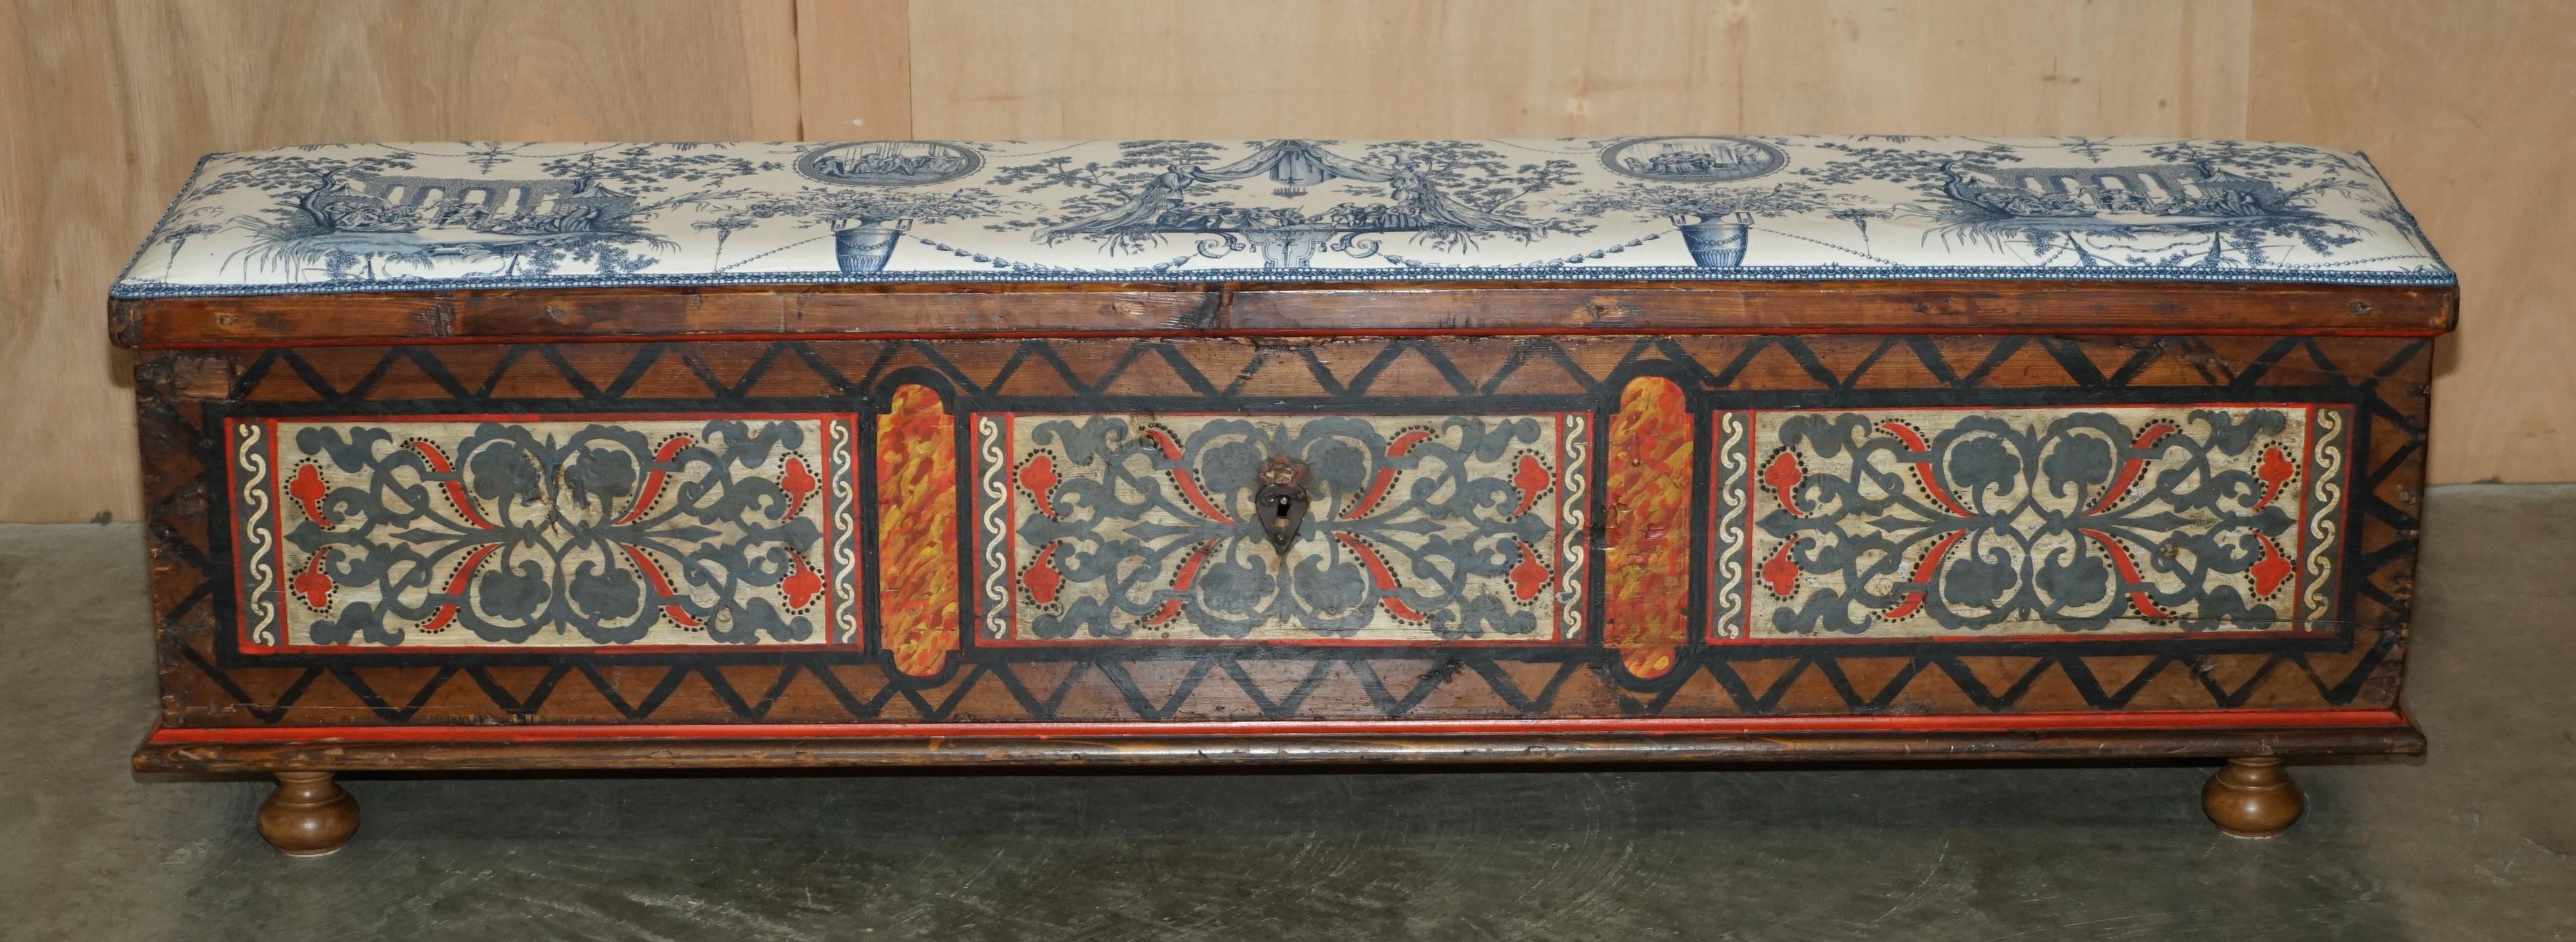 Early Victorian EXTRA LONG CIRCA 1840 HAND PAiNTED COFFER TRUNK CHEST USED AS HALL BENCH SEATING For Sale